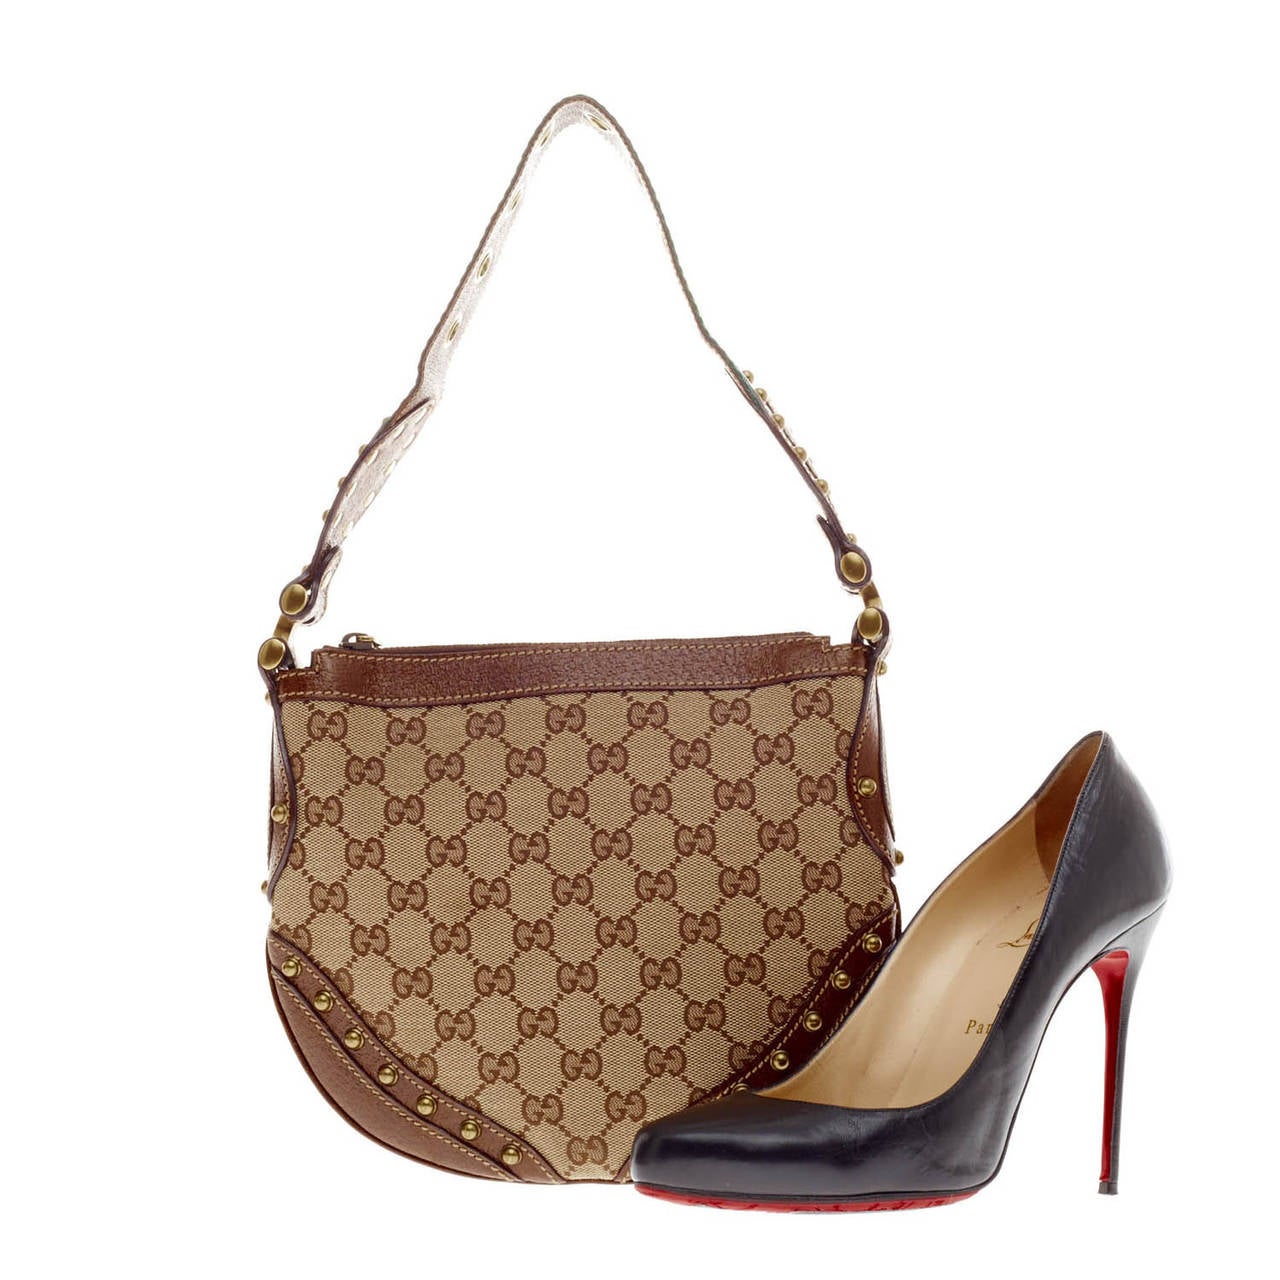 This authentic Gucci Pelham Hobo Studded Canvas in Small is the perfect, compact flat hobo to carry by your side. This western-inspired saddle bag is constructed with the brand's classic GG monogram print, and accented with brown leather trims and